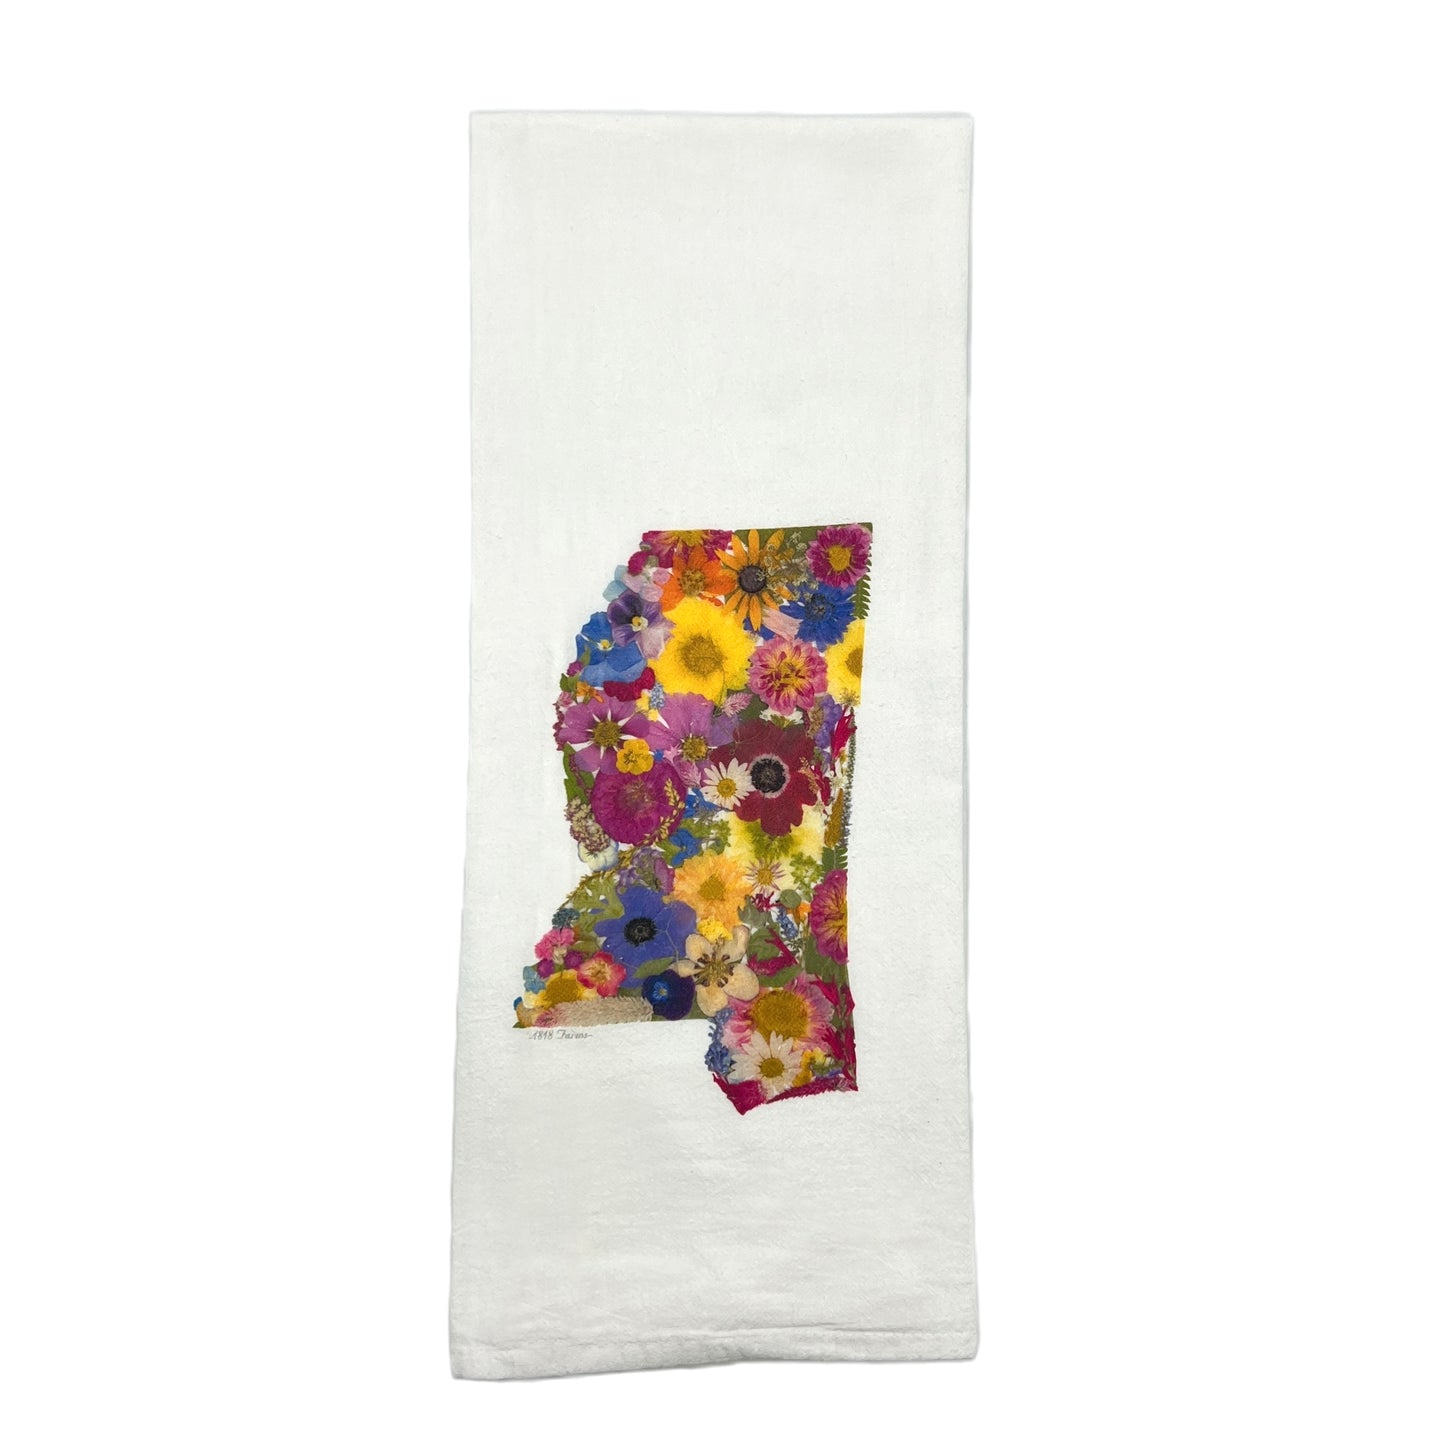 State Themed Flour Sack Towel Featuring Dried, Pressed Flowers - "Where I Bloom" Collection Towel 1818 Farms Mississippi  